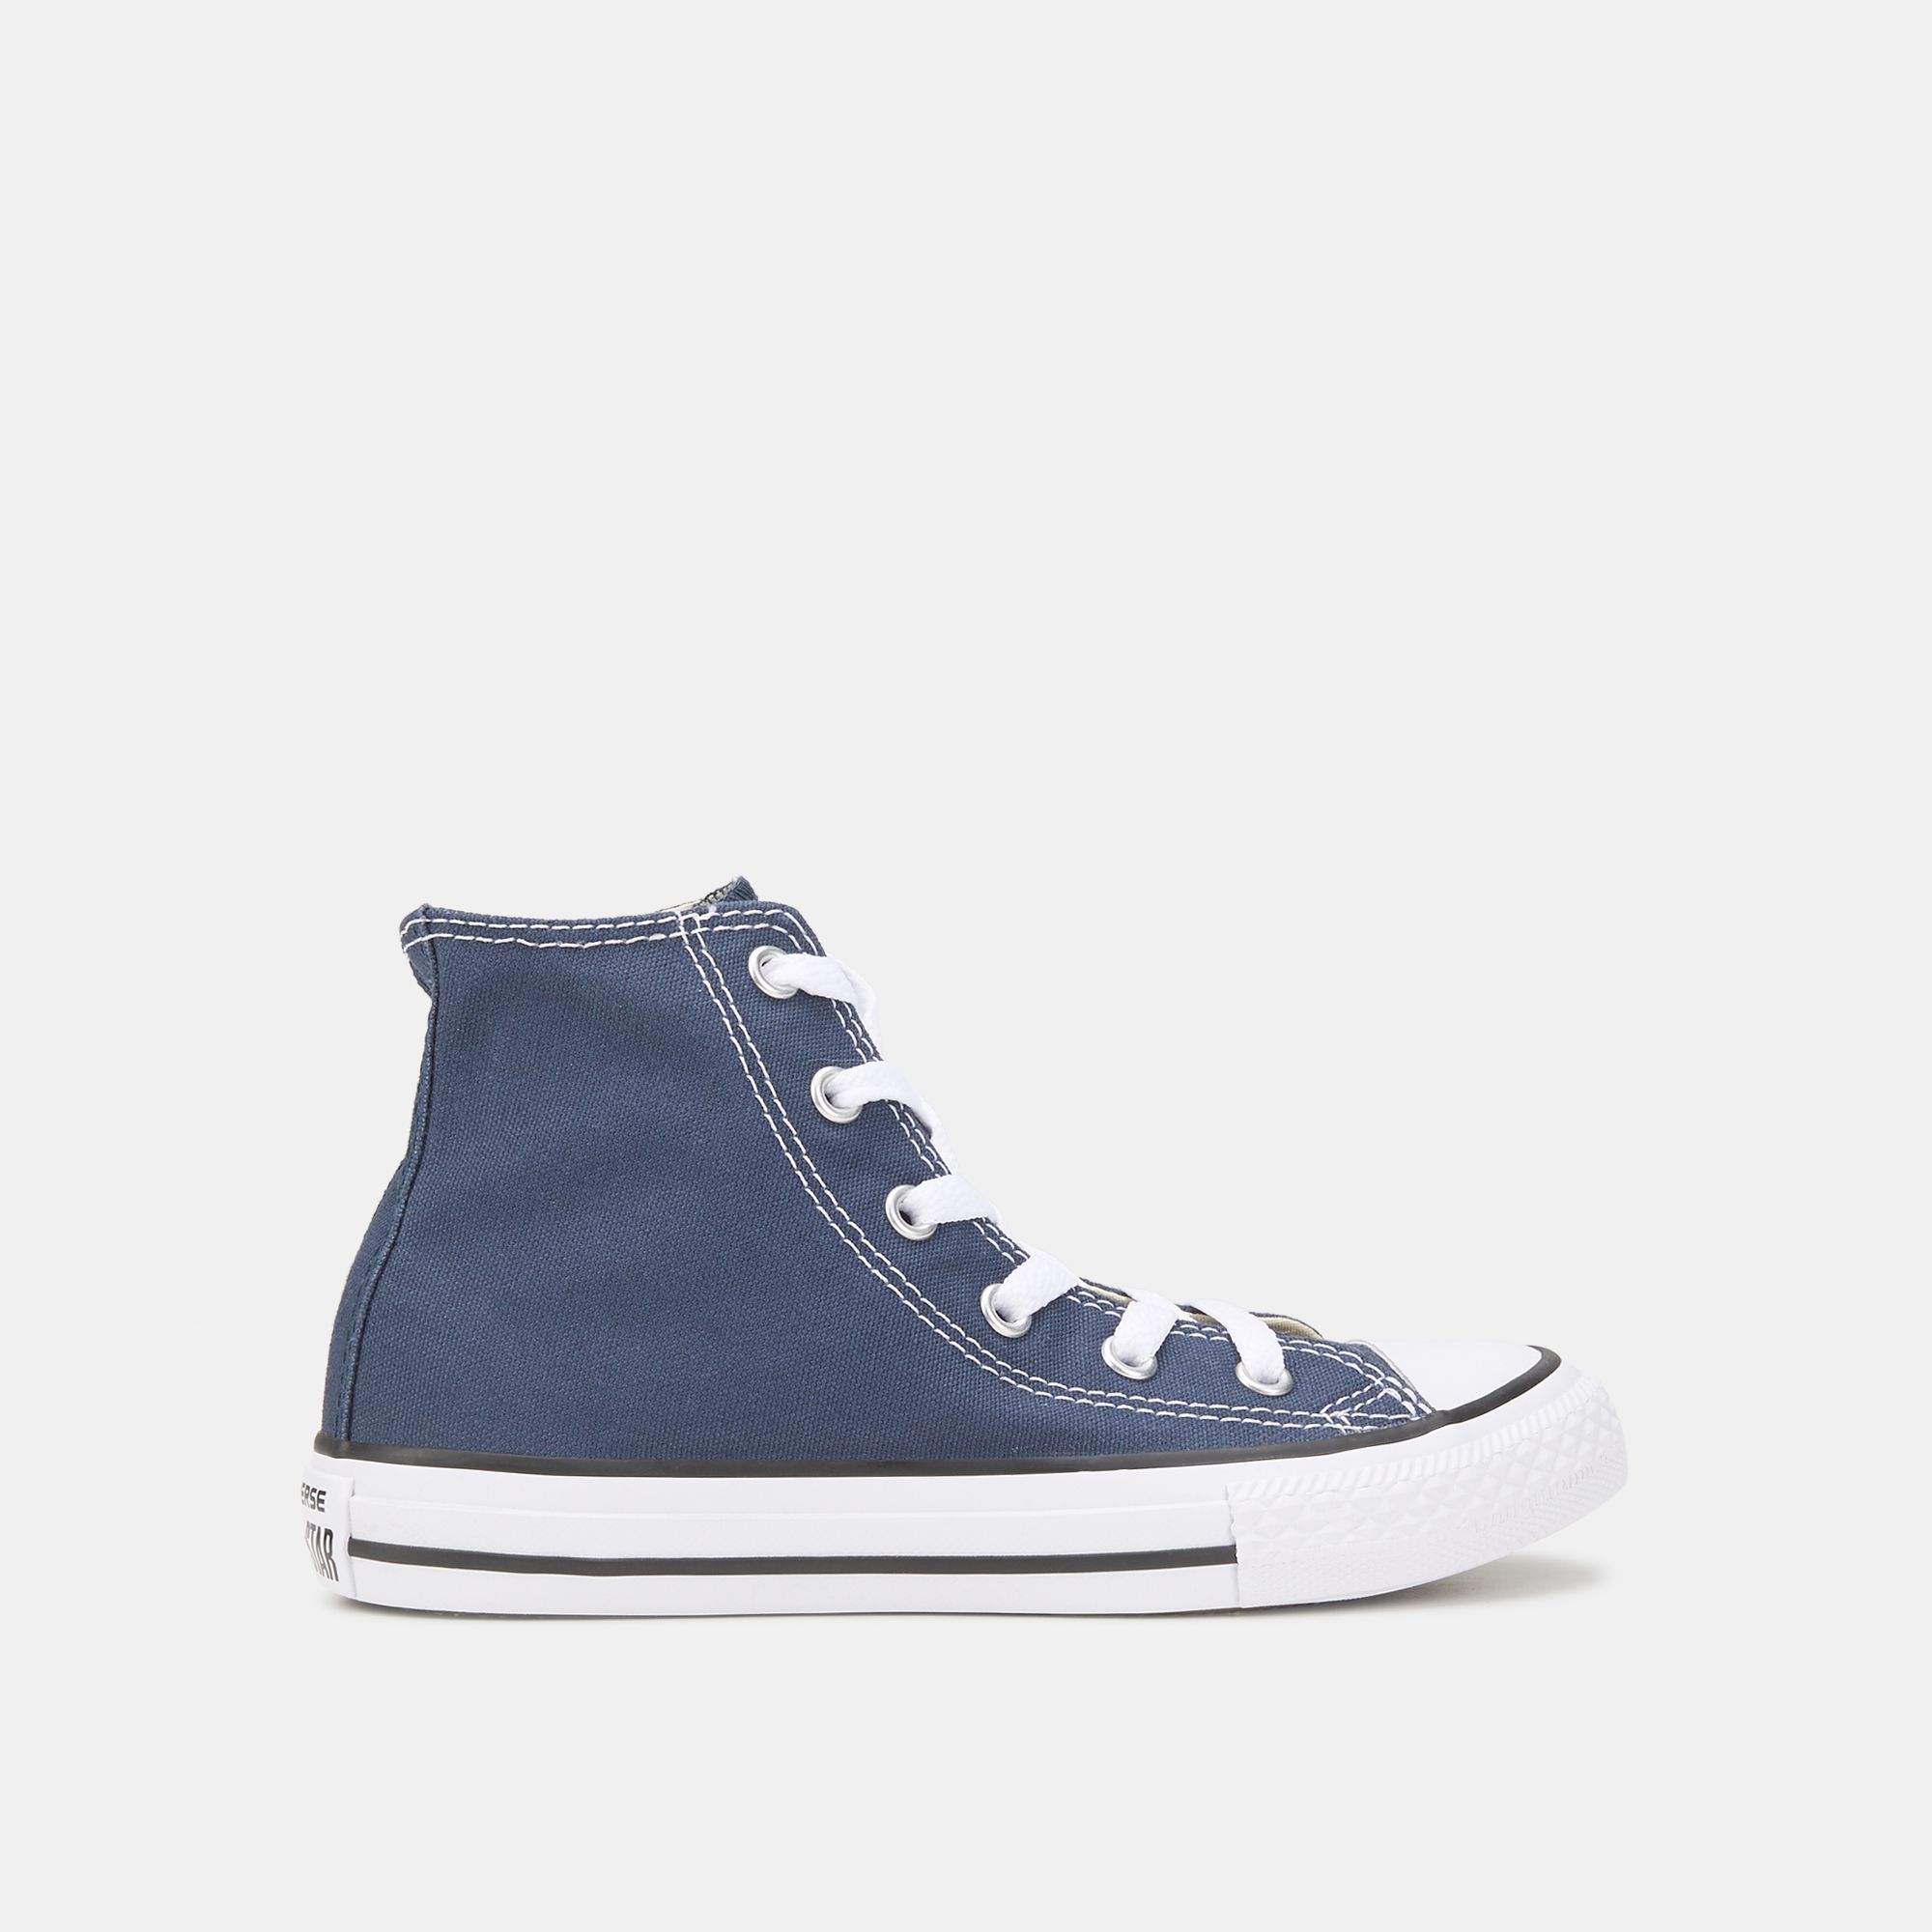 Buy Converse Kids' Chuck Taylor All Star High Top Shoe (Younger Kids ...